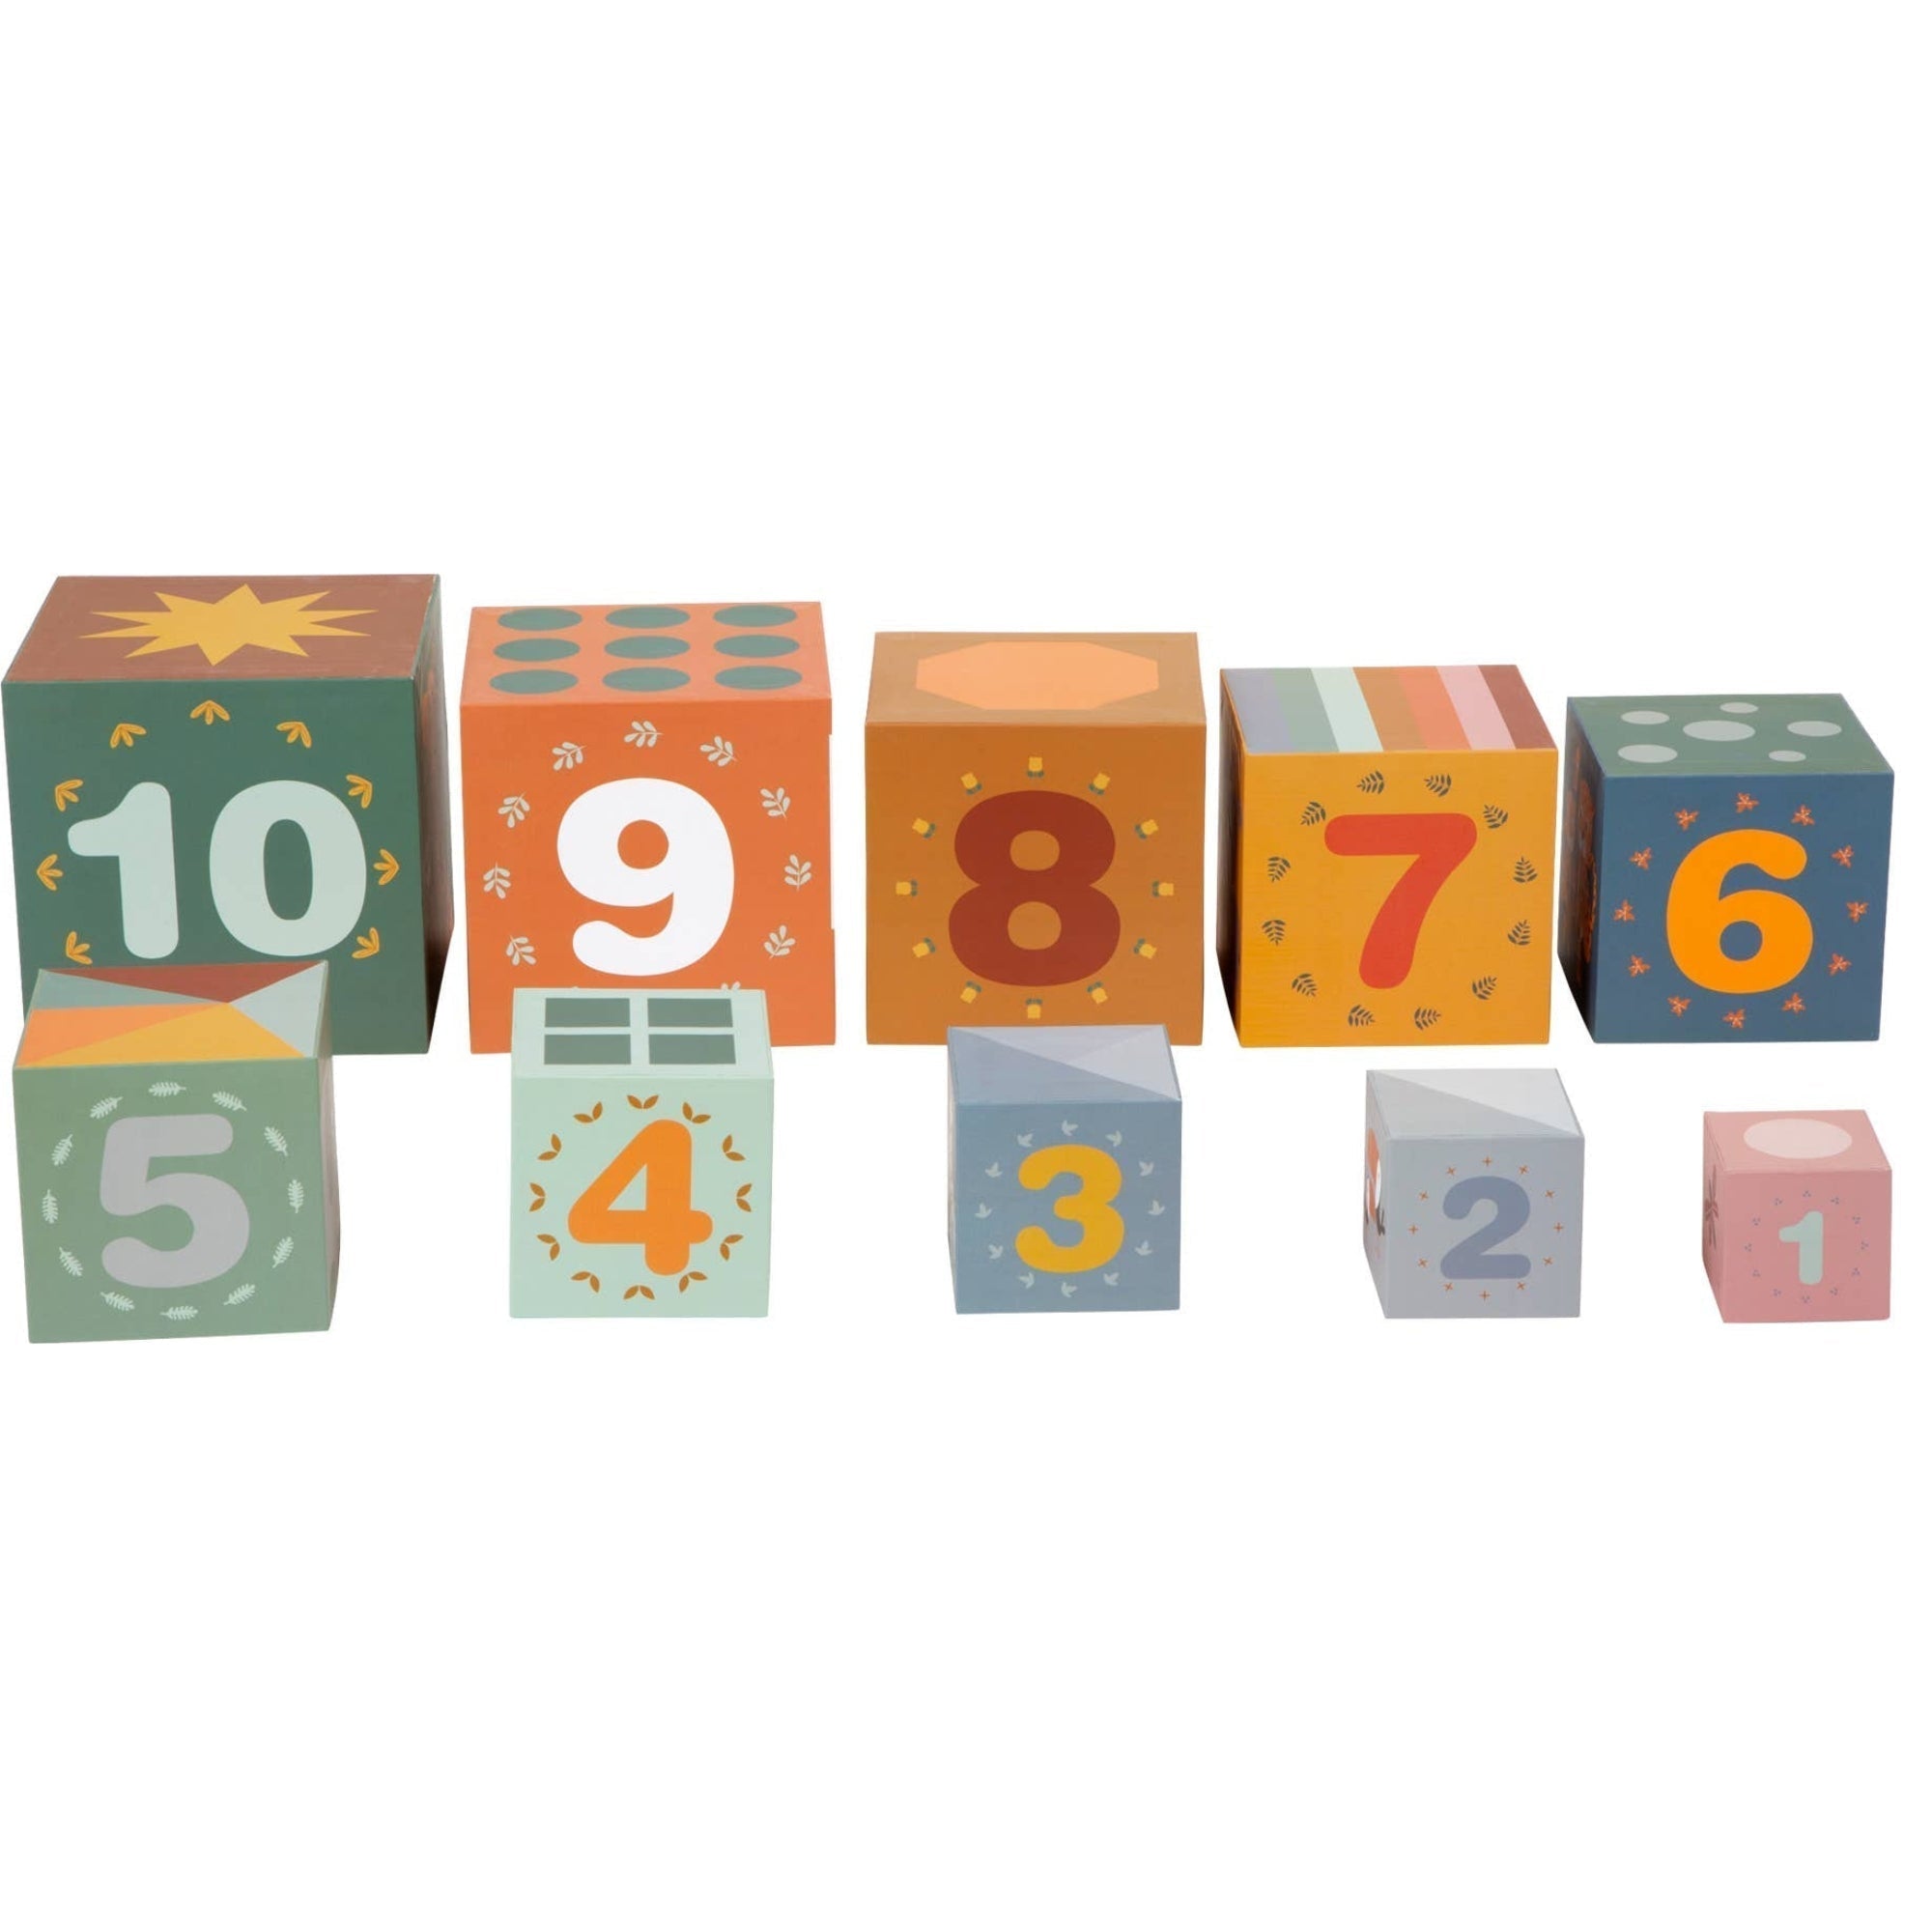 Stacking Cubes Safari, Graduating in size, these delightful Stacking Cubes Safari need to be stacked in the correct order, from largest to smallest, to create a tower. Each Stacking Cubes Safari features a detailed scene with numbers and animals. As little ones stack each Stacking Cubes Safari, they can discuss the animal on one side, developing their language skills and vocabulary. Perfect for early learning, these cubes are a versatile learning aid. Stacking Cubes Safari Once playtime is over, the stackin